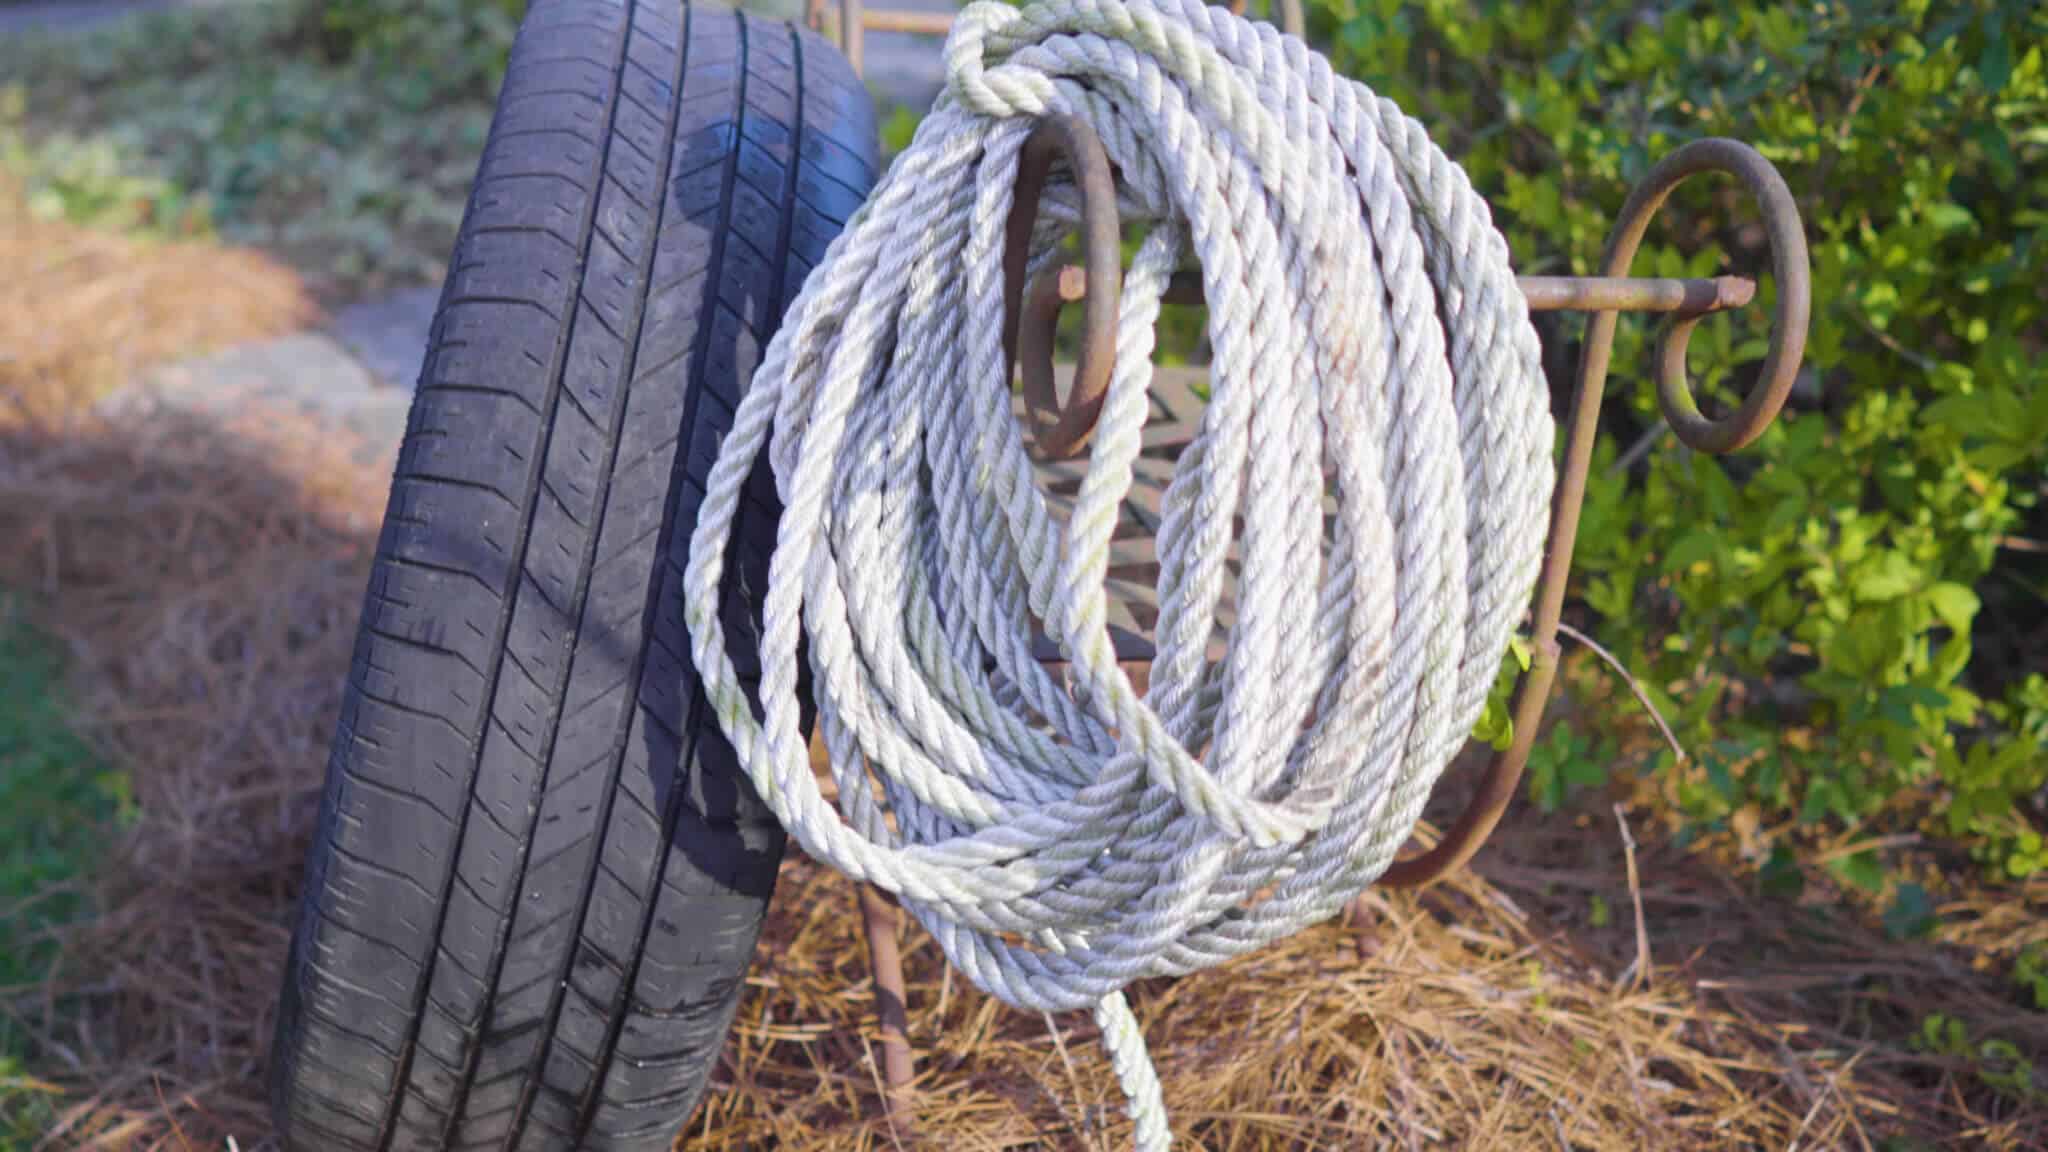 DIY tire swings are a must have for summer fun